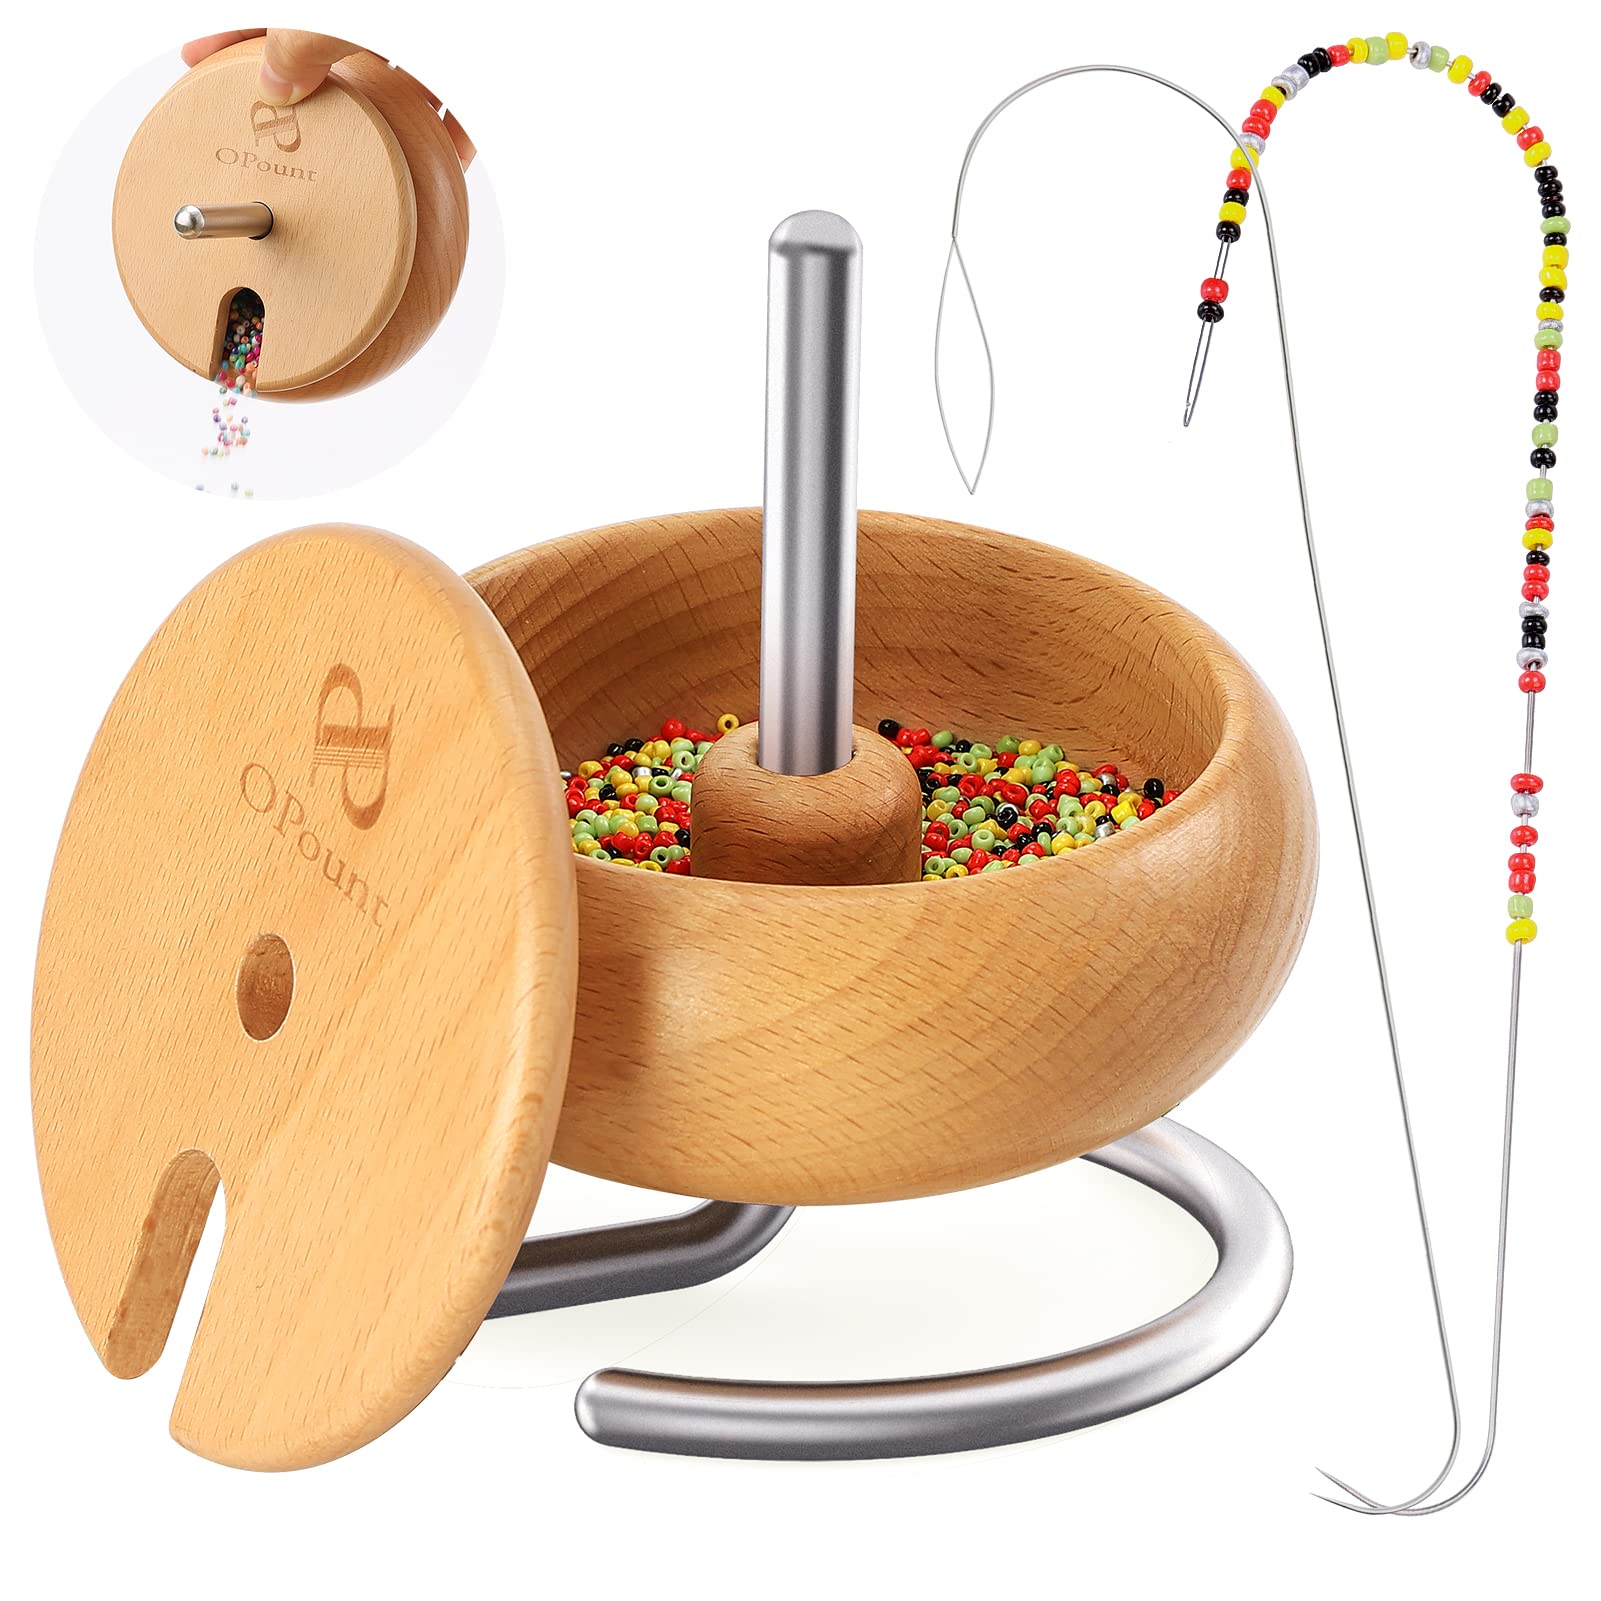 PP OPOUNT Bead Spinner with 2 PCS Exlarge Eye Beading Needles, Wooden Spin  Bead Loader for DIY Seed Beads, Waist Beads, Bracelets, Spin Beading Bowl,  Bead Bowl Spinner and Needles (Patent Protection)